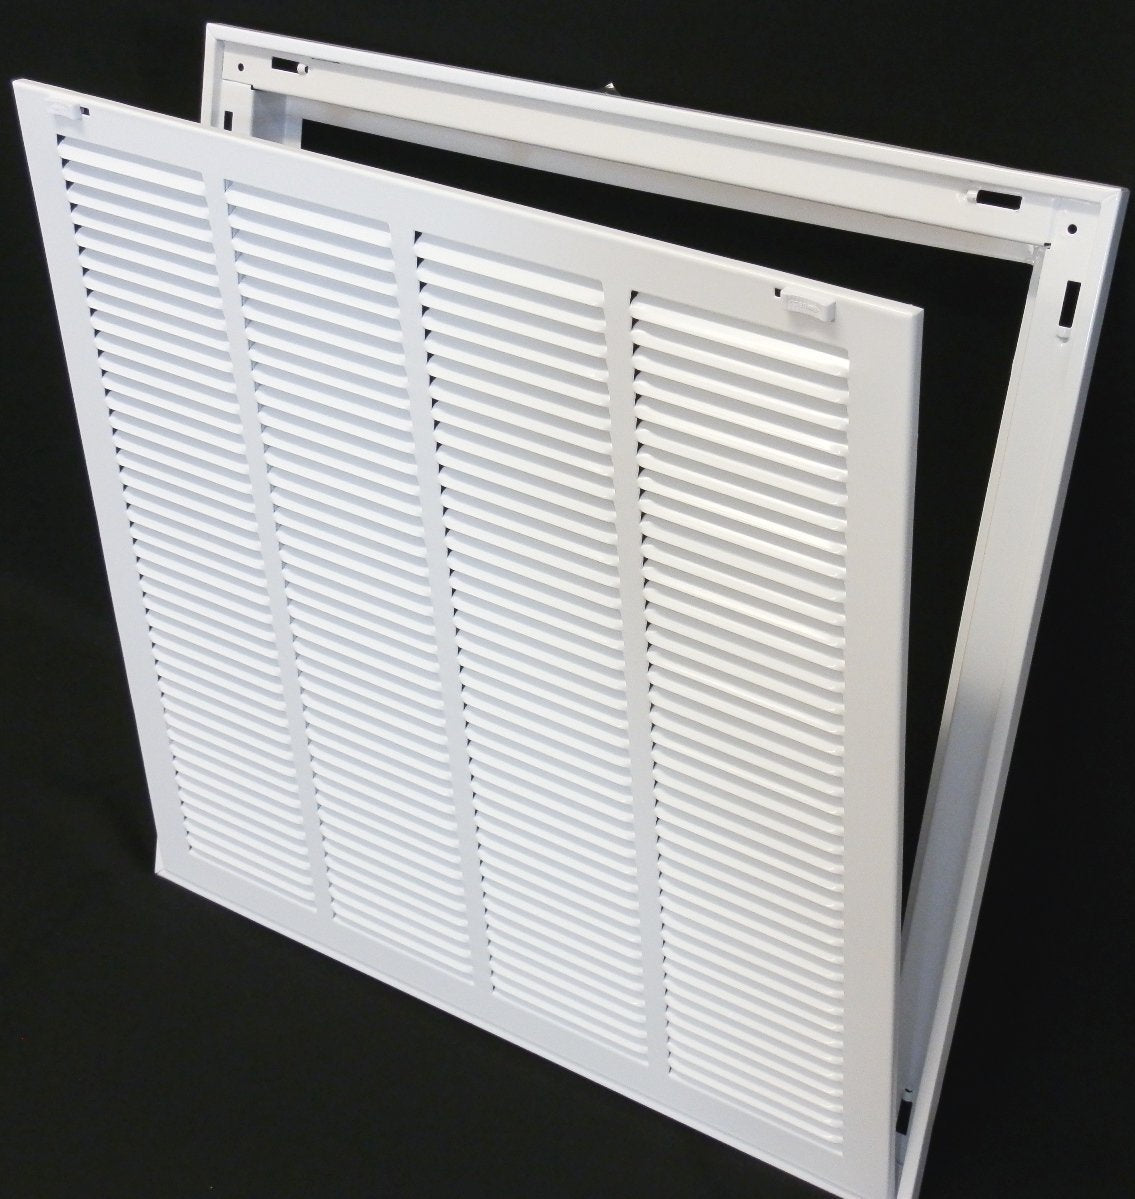 28&quot; X 32&quot; Steel Return Air Filter Grille for 1&quot; Filter - Removable Frame - [Outer Dimensions: 30 5/8&quot; X 34 5/8&quot;]